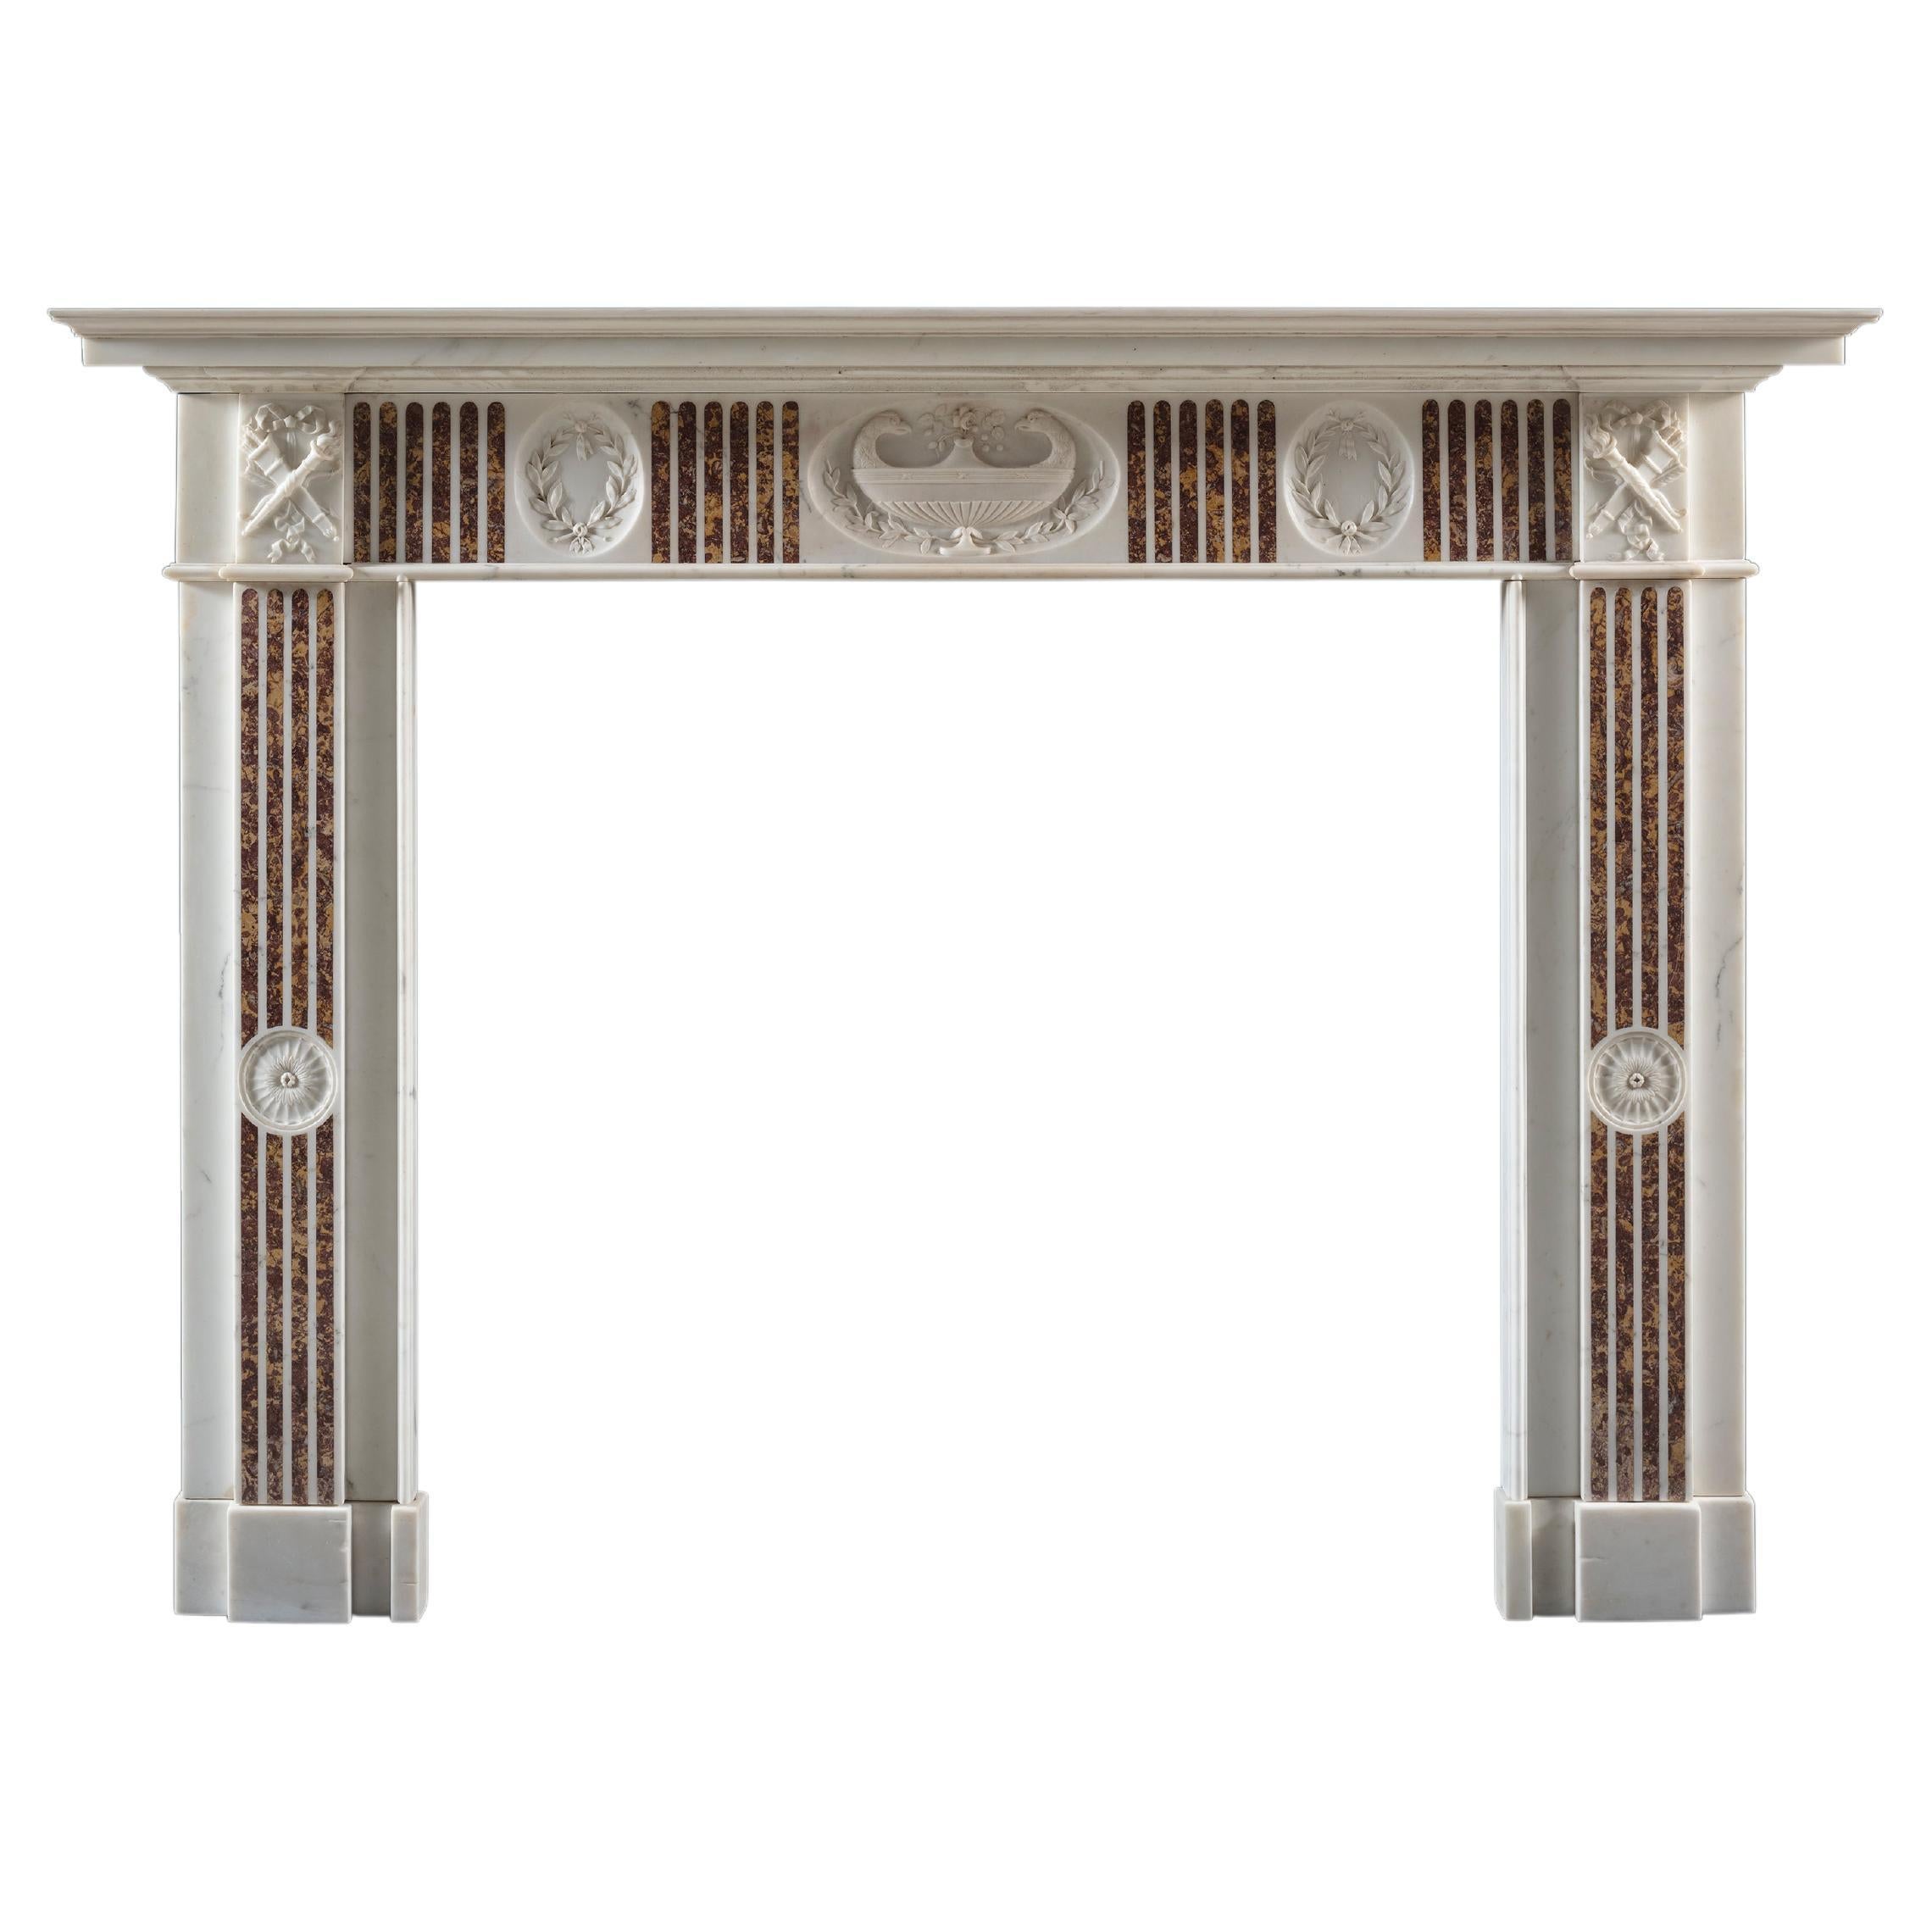 A Carved 18th century Chimneypiece of Neoclassical Design 